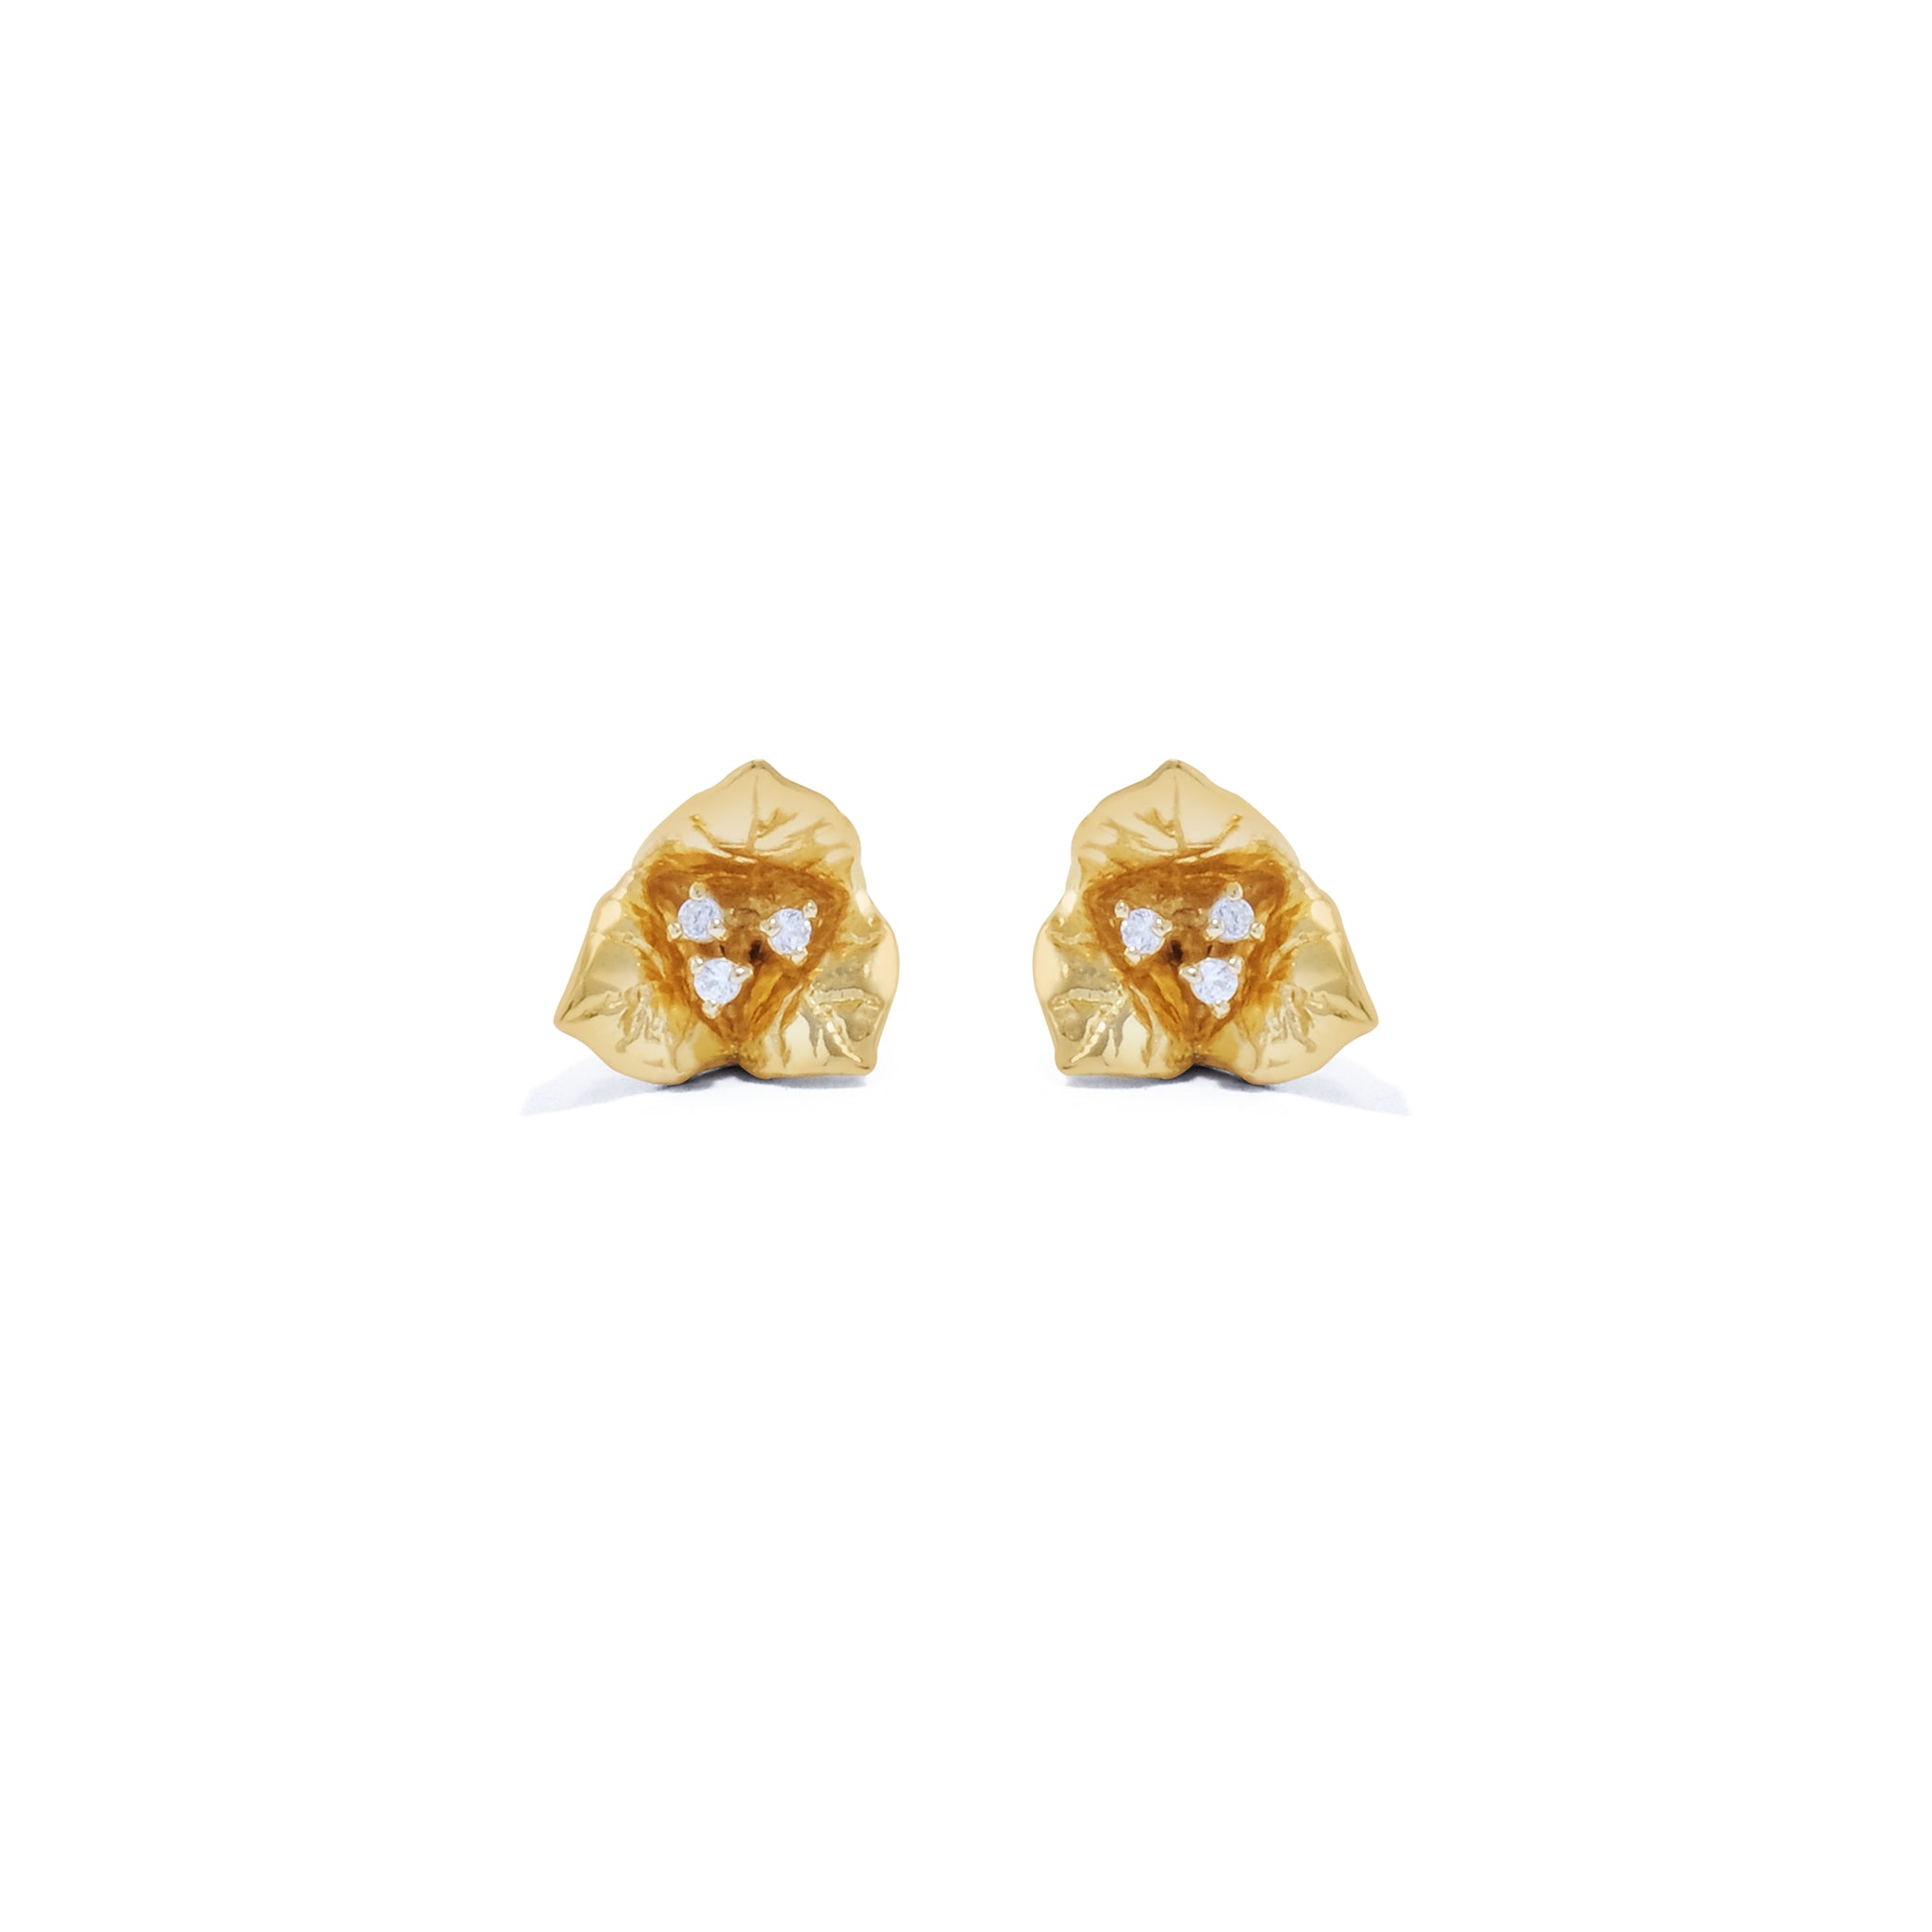 Anting Stud Mini Perak Bougenville Sterling Silver